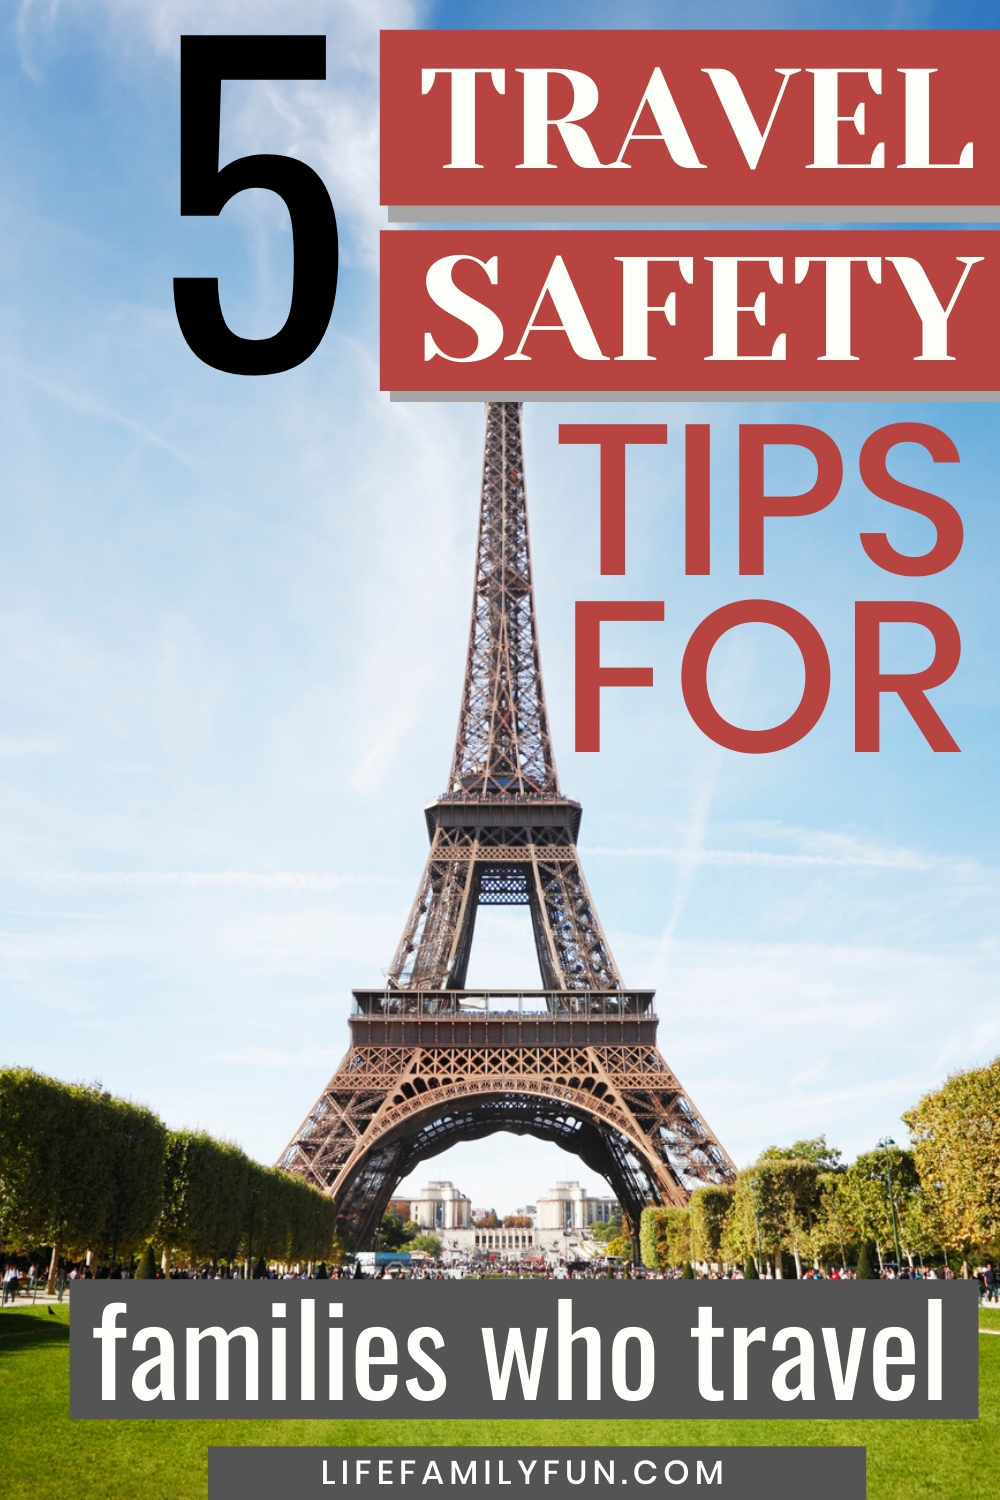 Travel Safe, Travel Tips, Traveling With Family